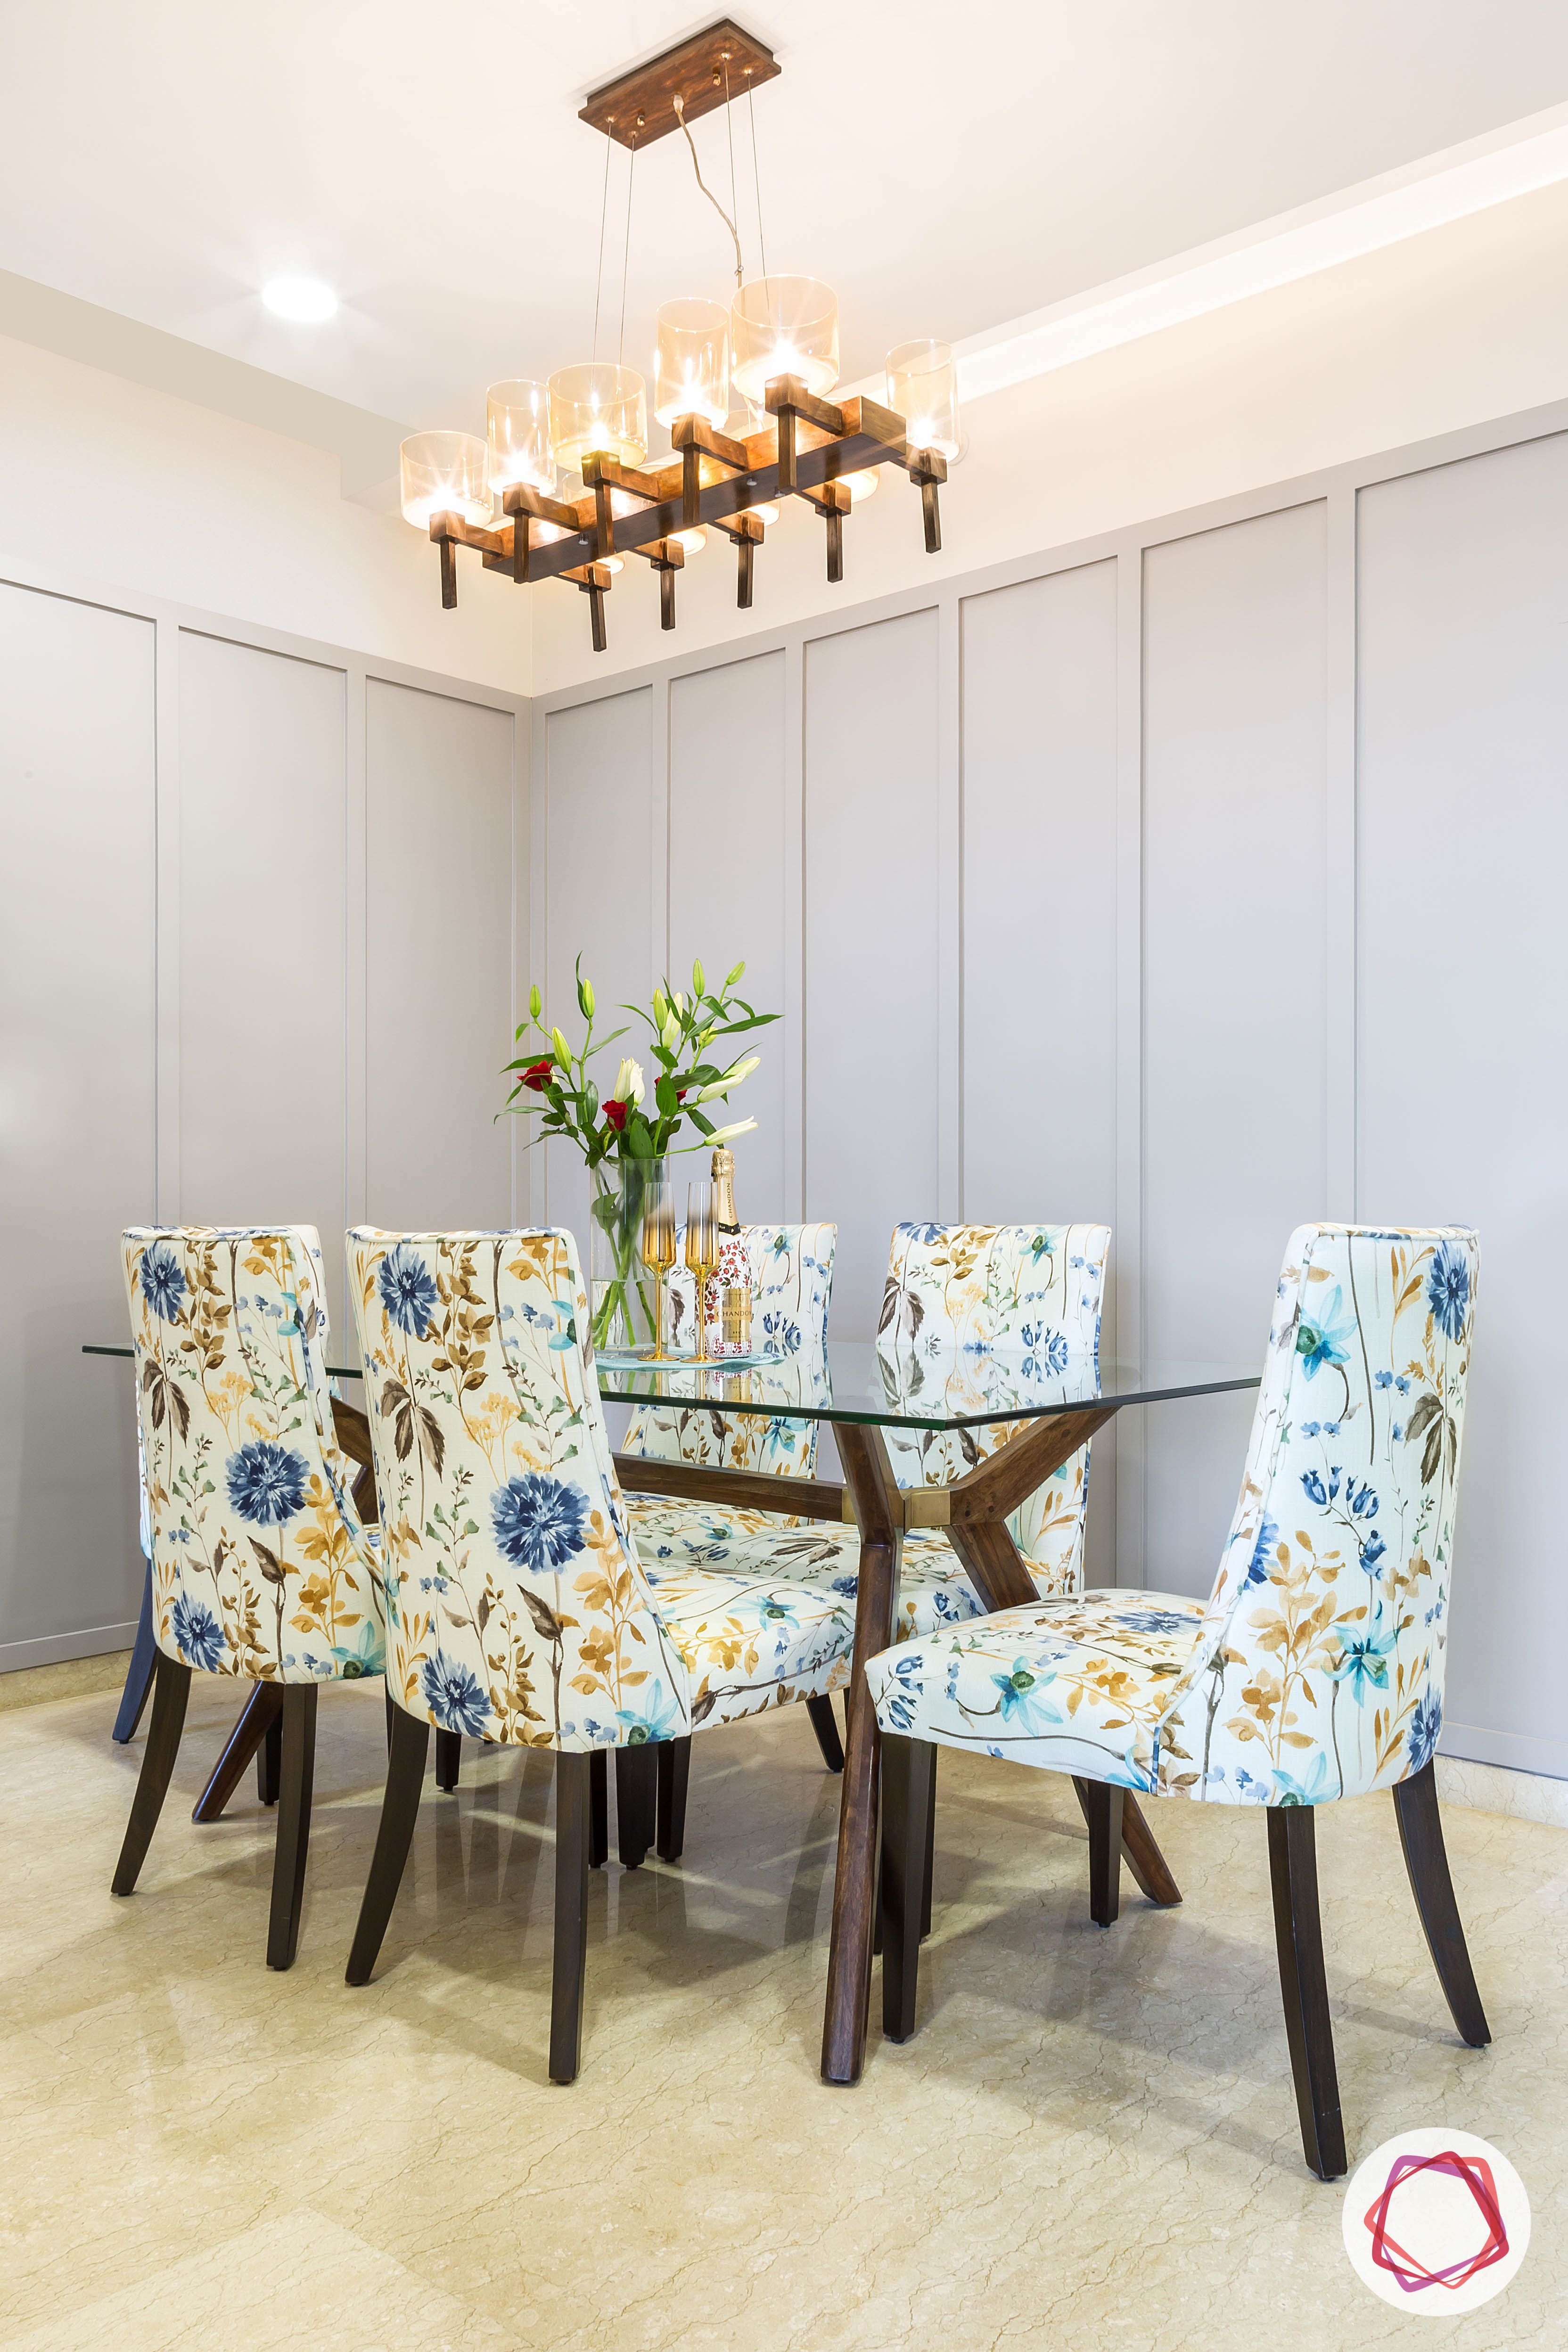  lodha group-dining room designs-glass dining table-floral dining chair designs